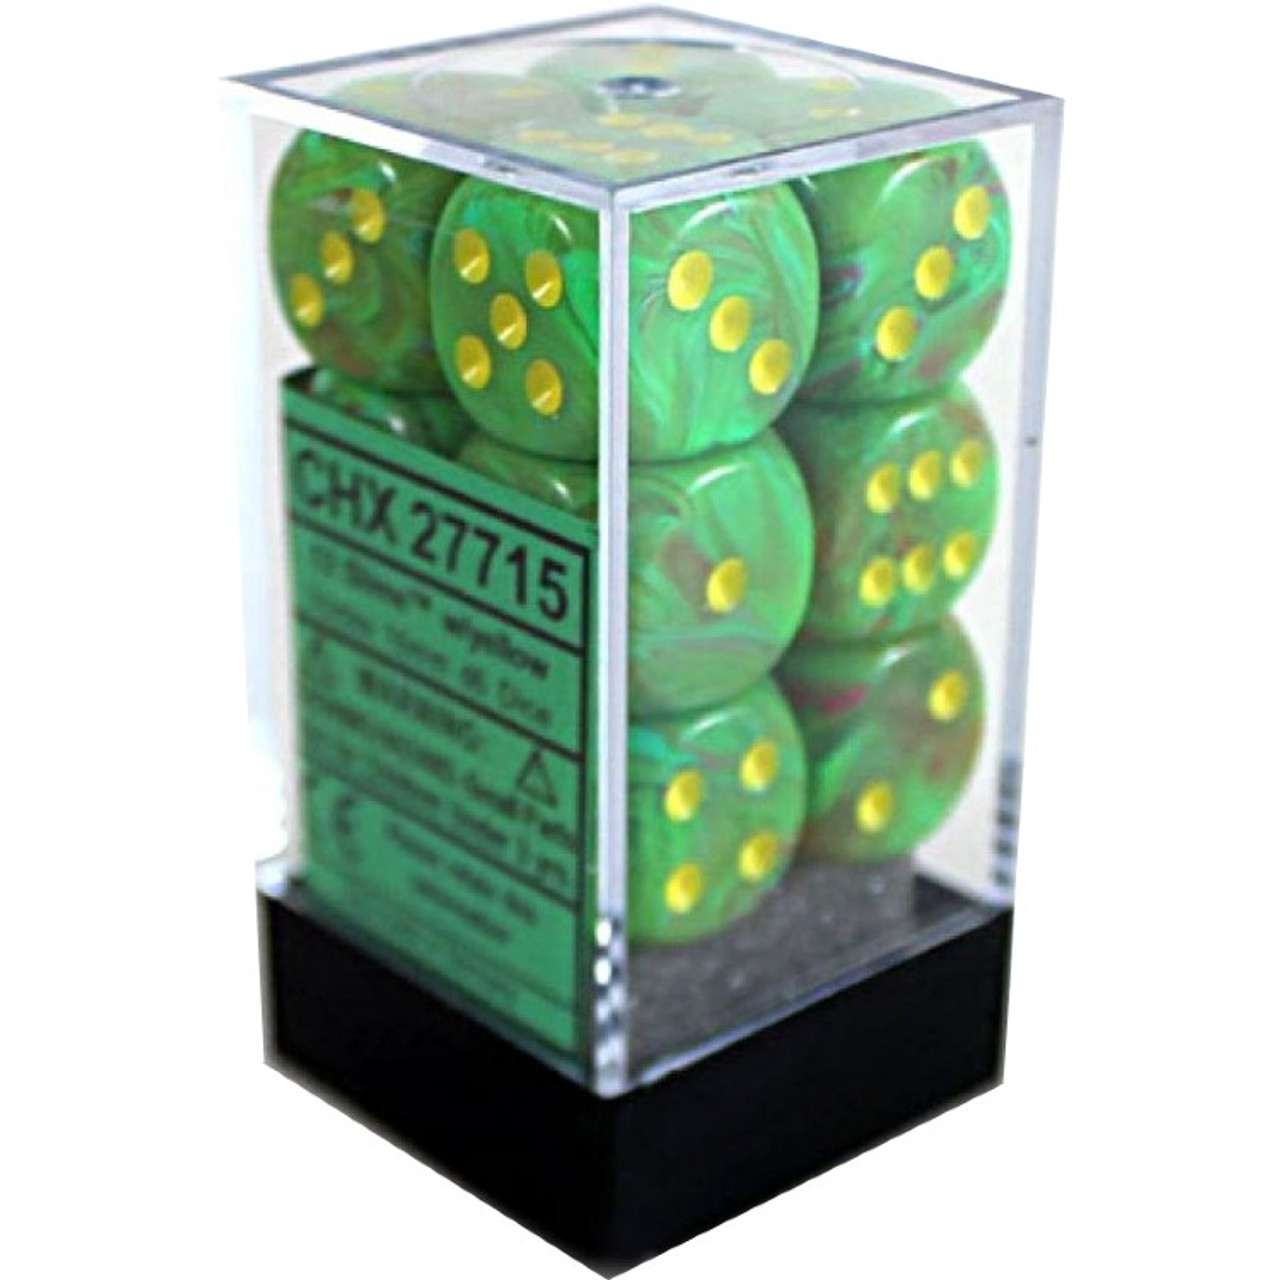 Chessex Vortex Dice D6 16mm Slime W/yellow 12 MINT for sale online 